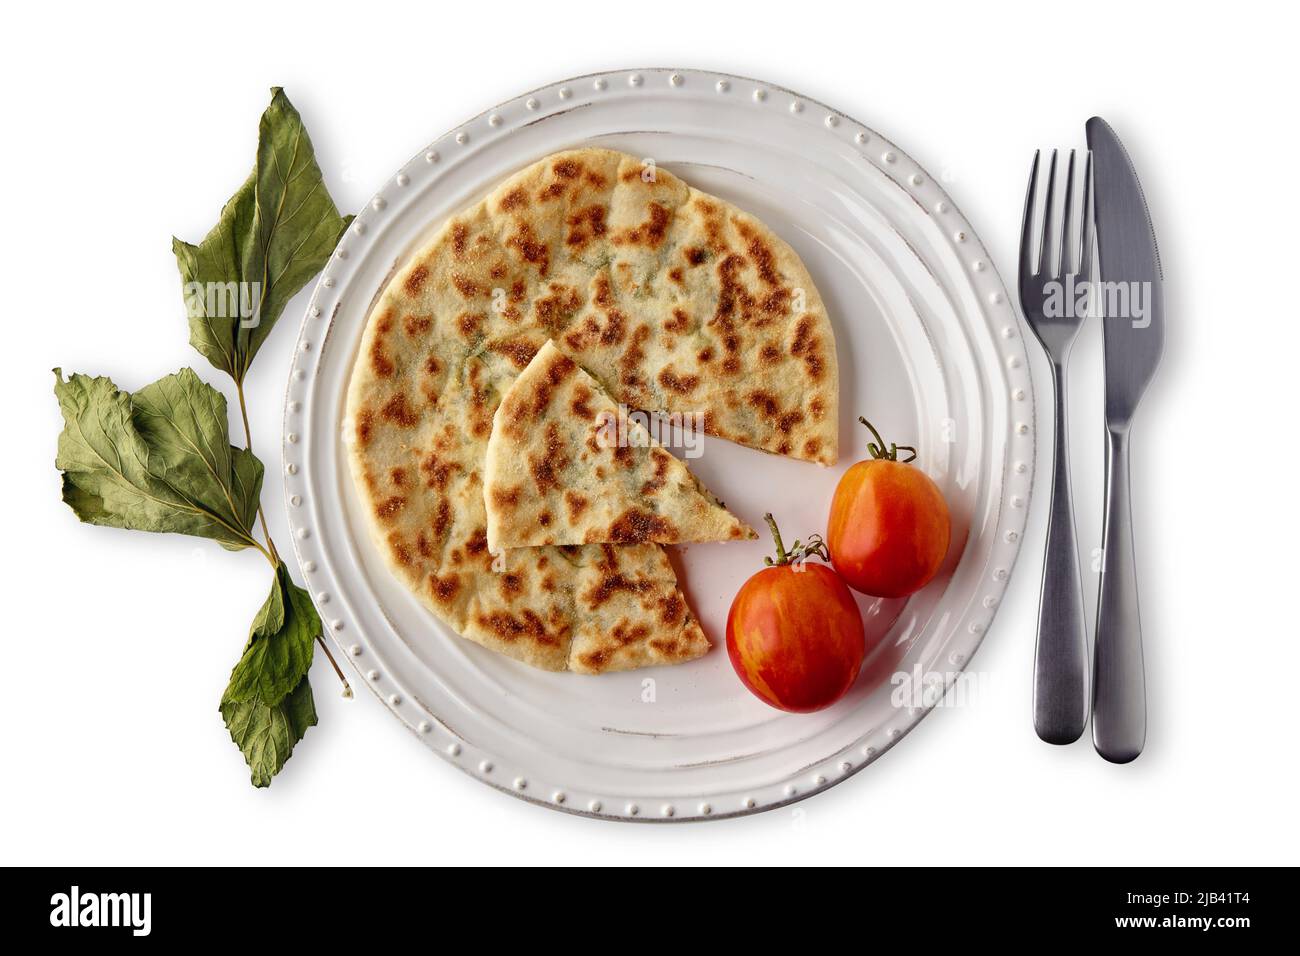 Flatbreads with cheese and herbs on a white plate with cutlery, decorated with tomatoes and dried currant leaves, isolated on a white background. Top Stock Photo